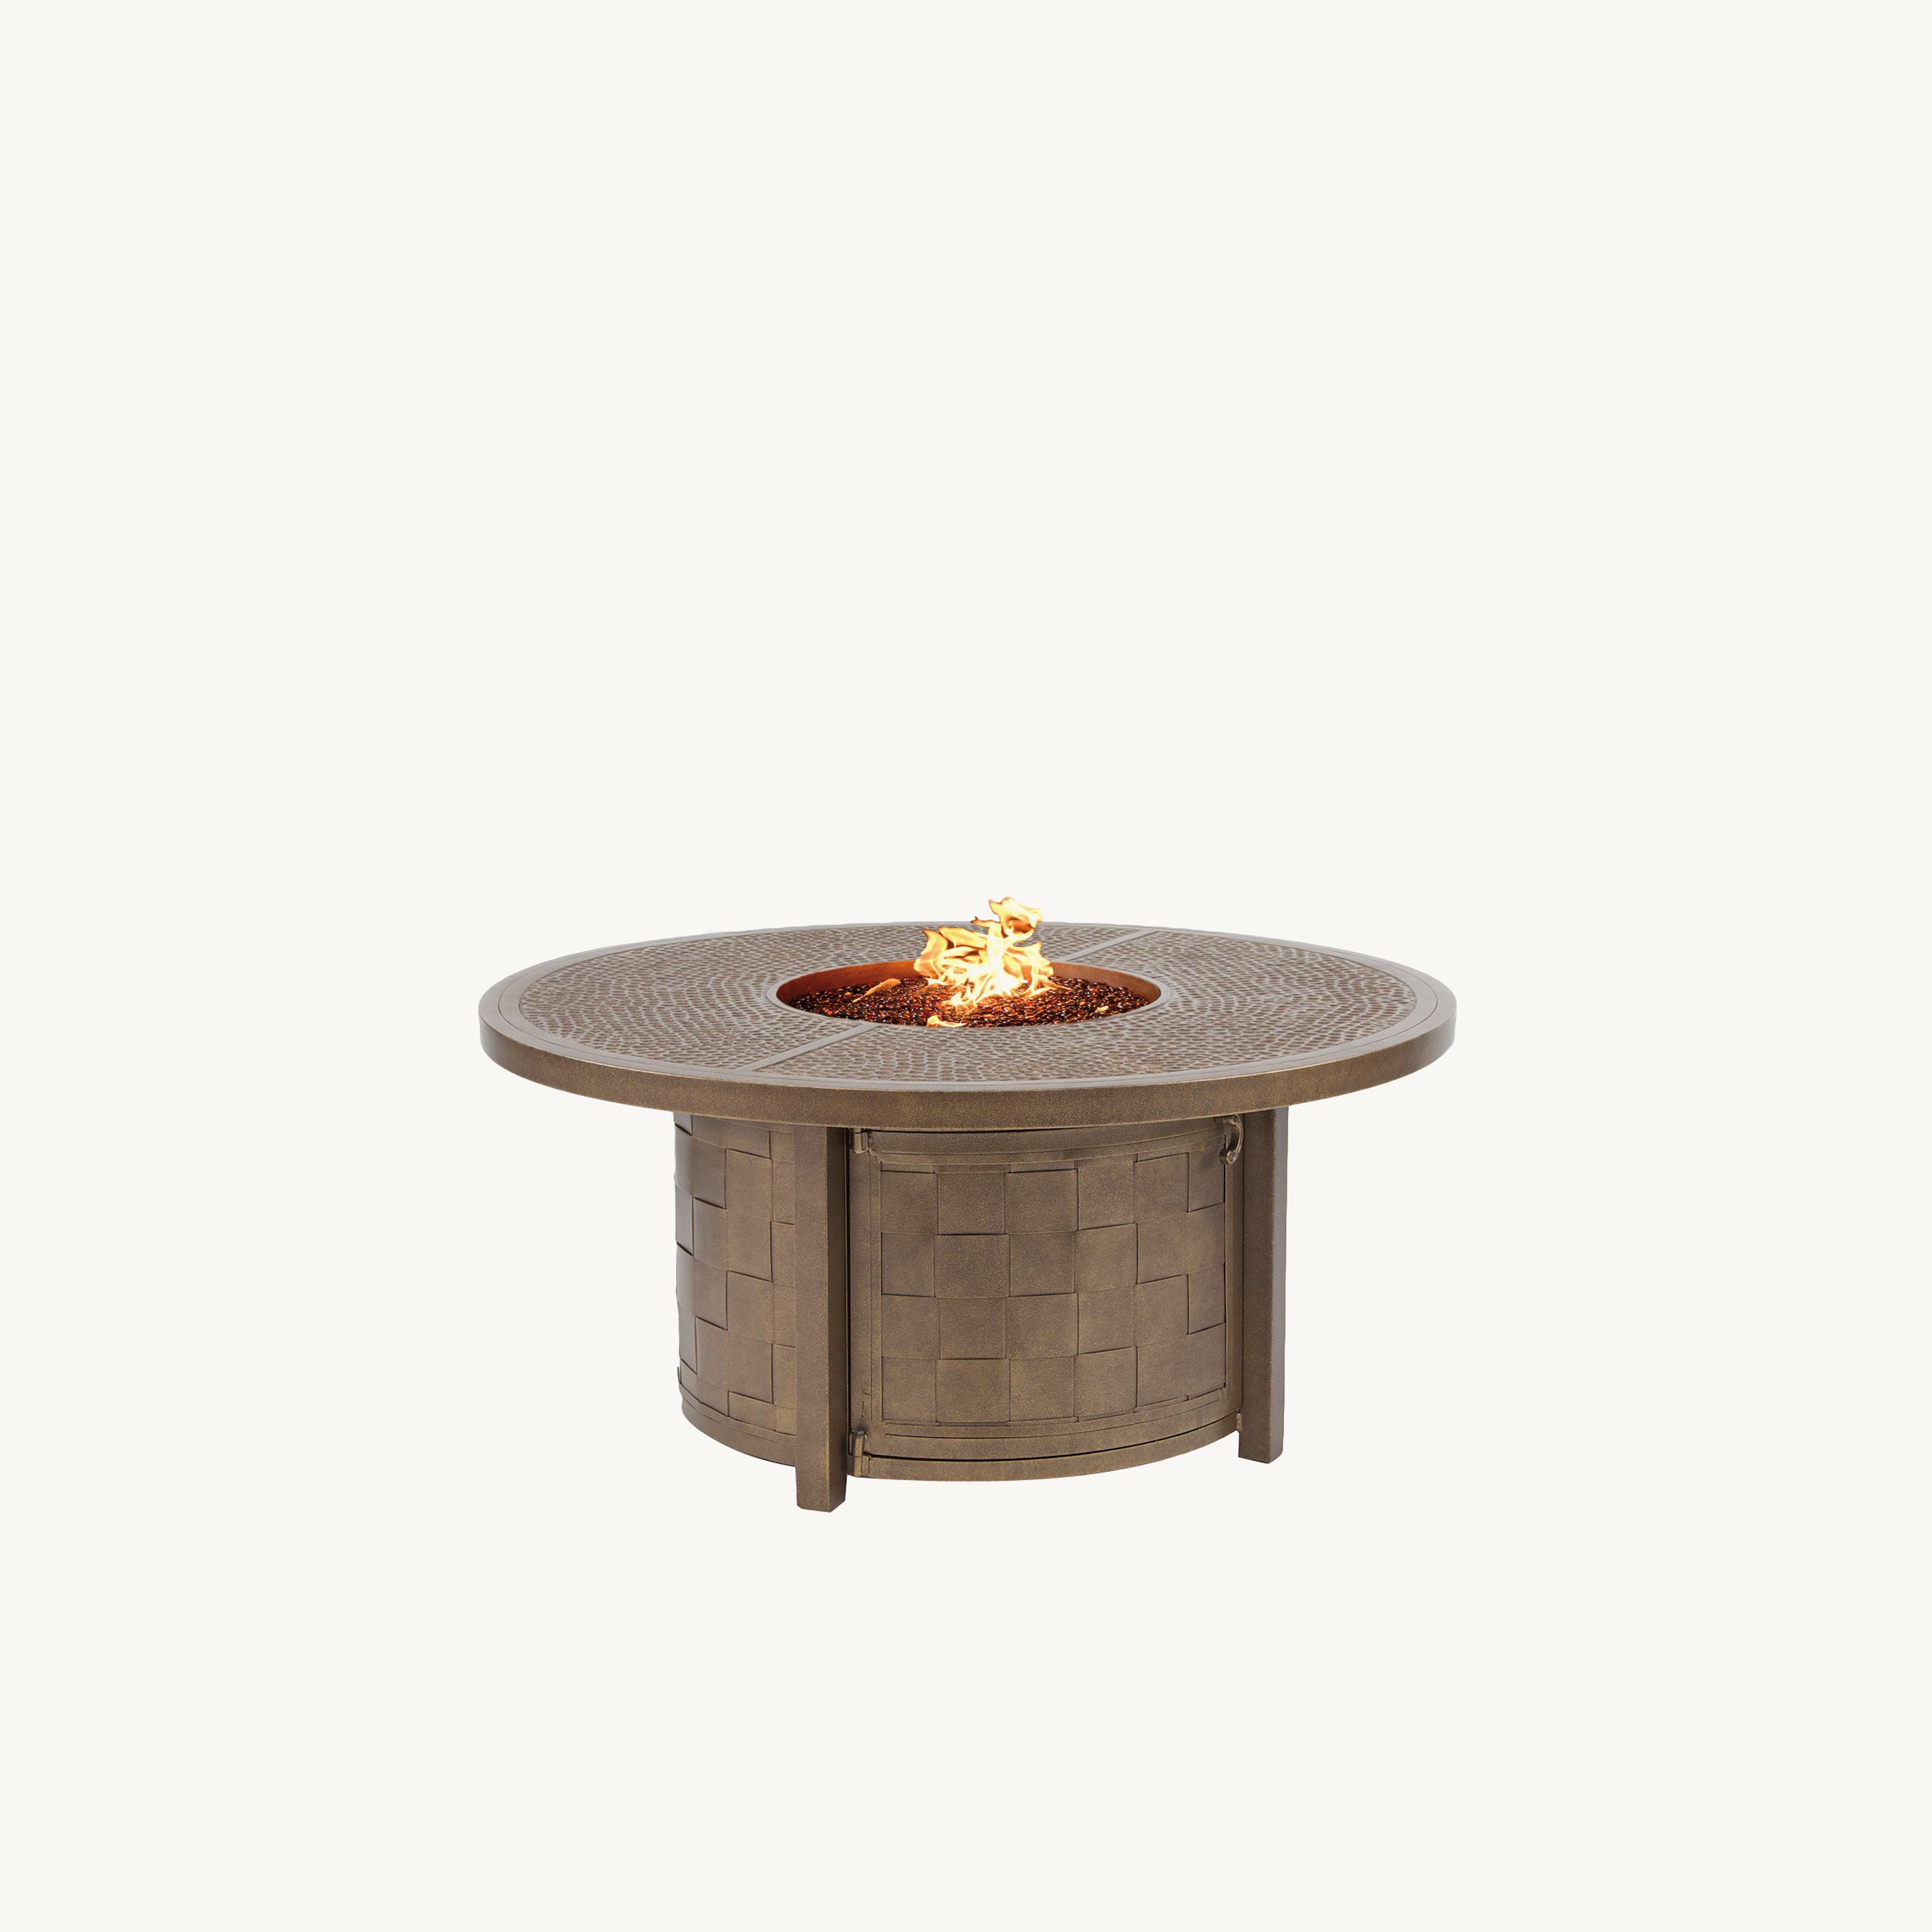 Classical 49" Round Coffee Table with Firepit By Castelle